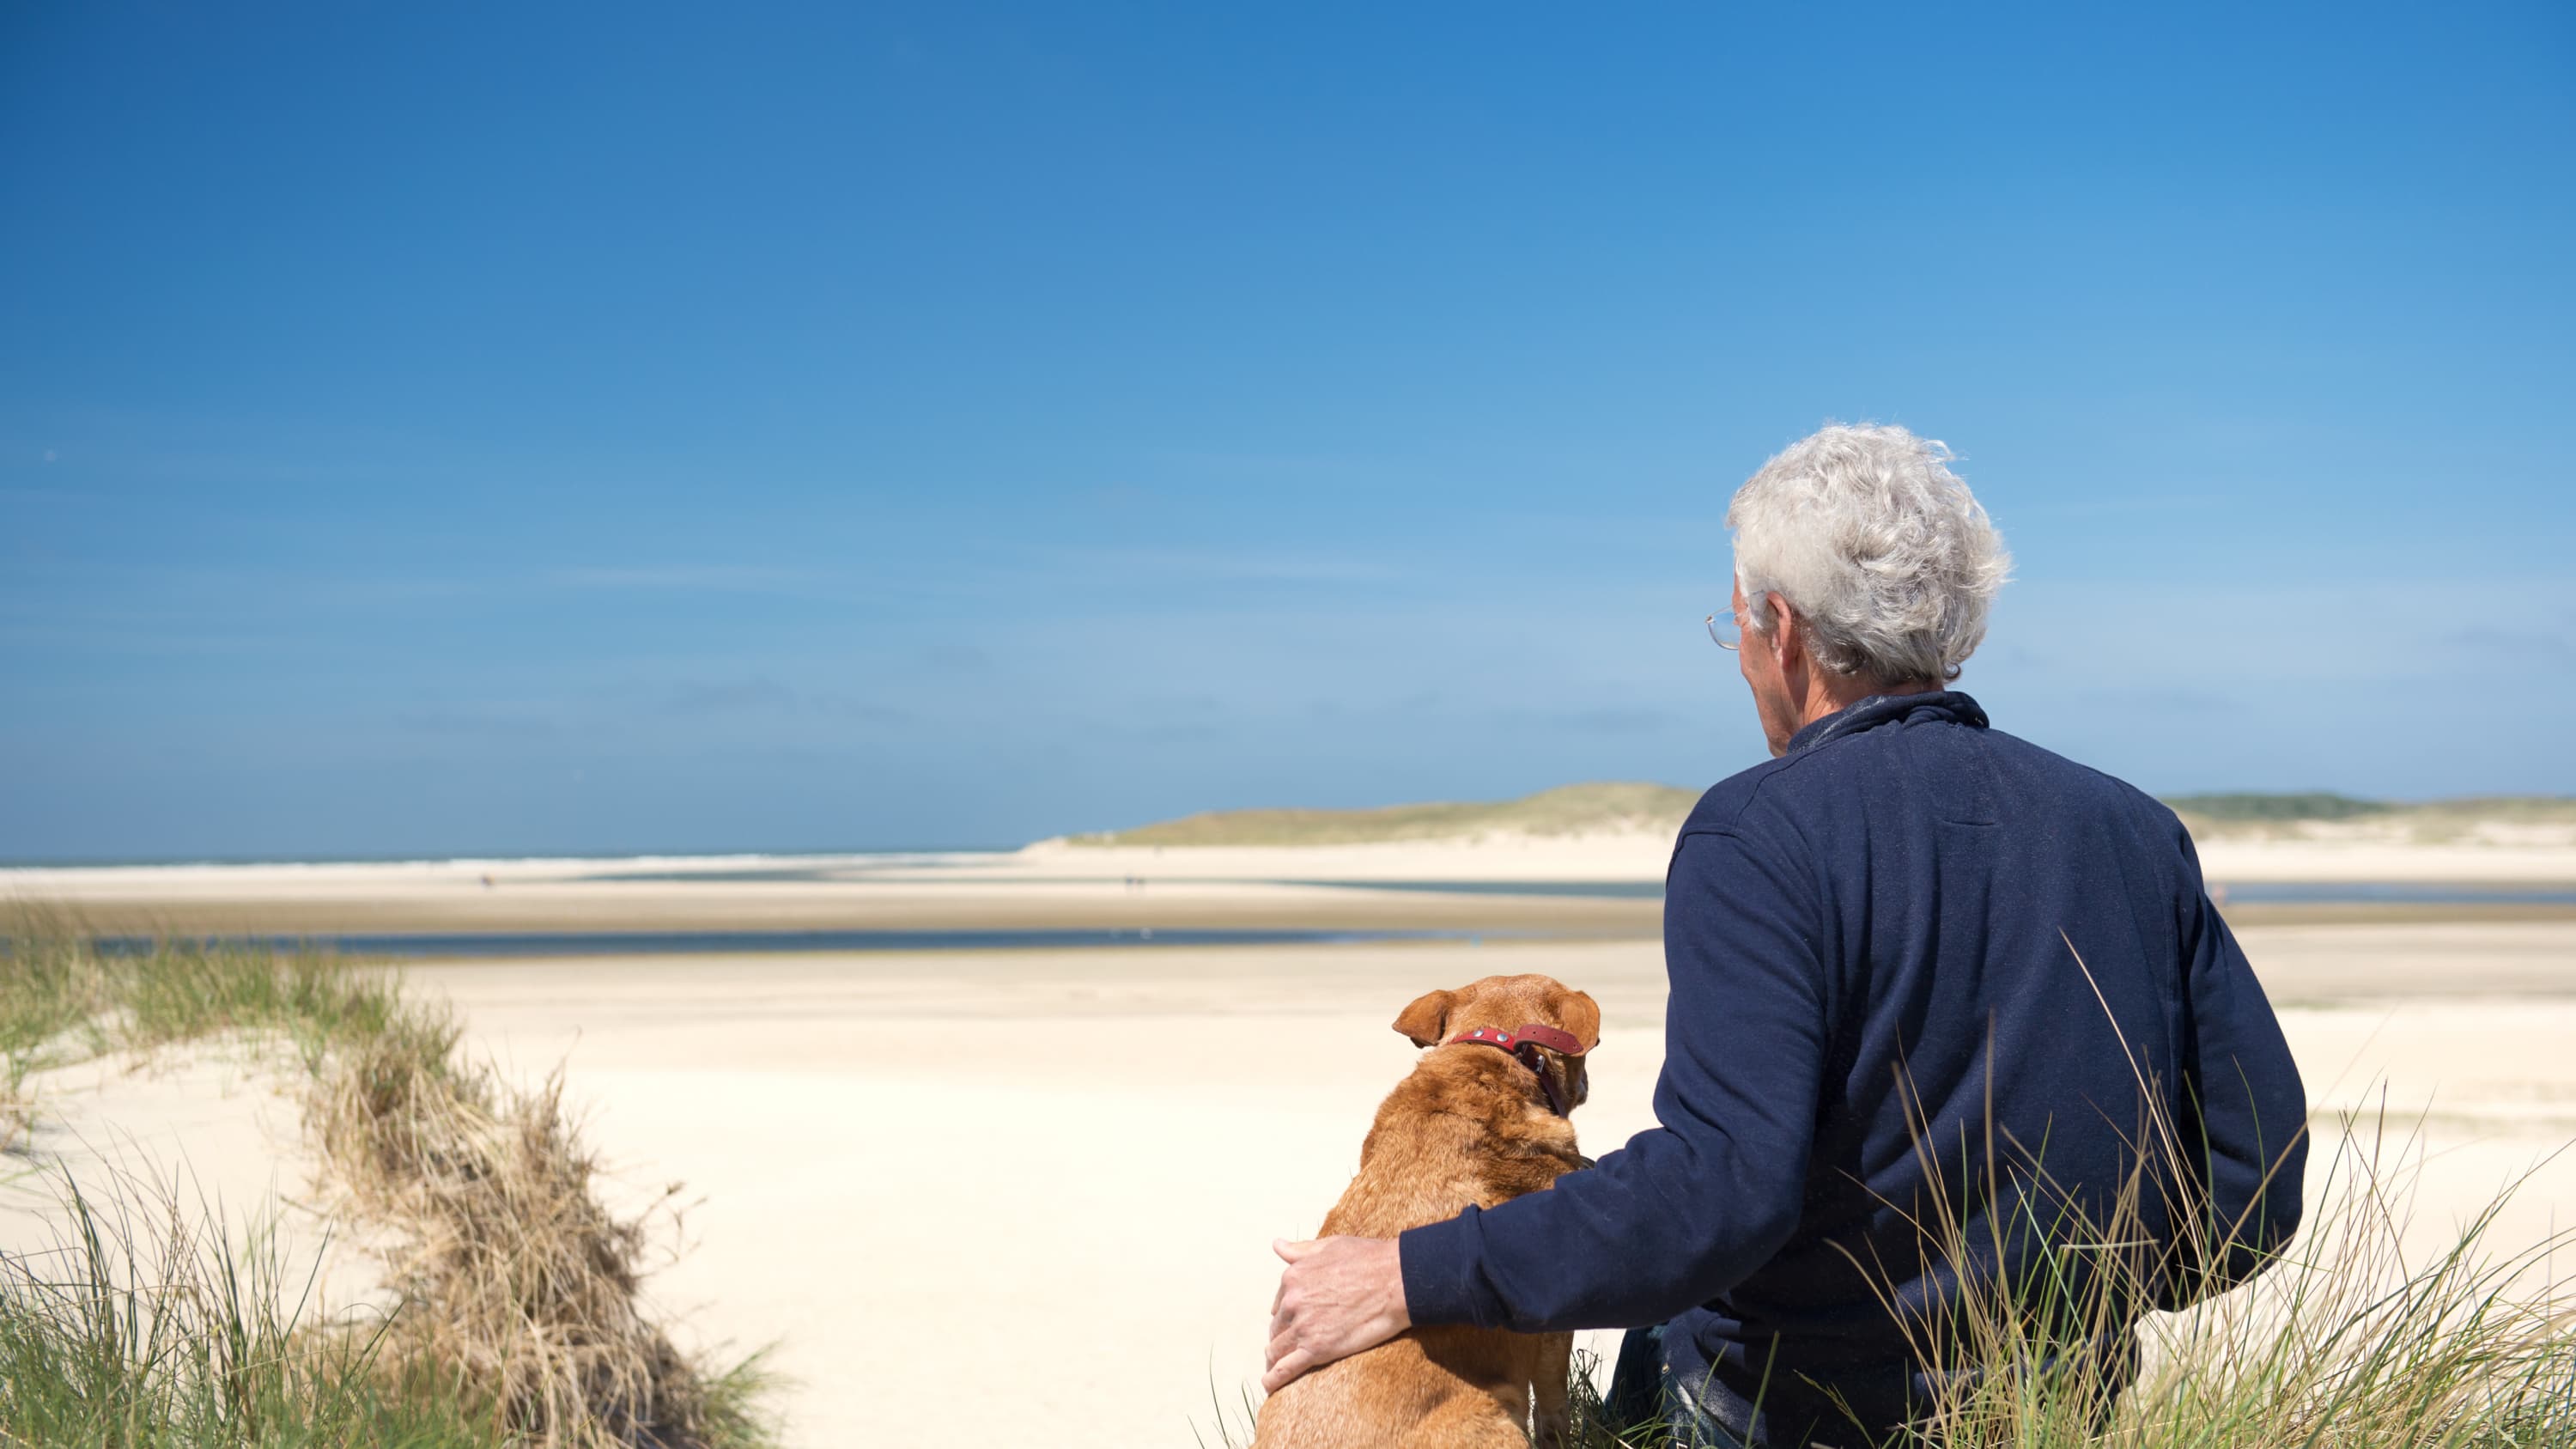 A 60-something year old man, possibly thinking about psoriasis, sits on the beach with his dog.